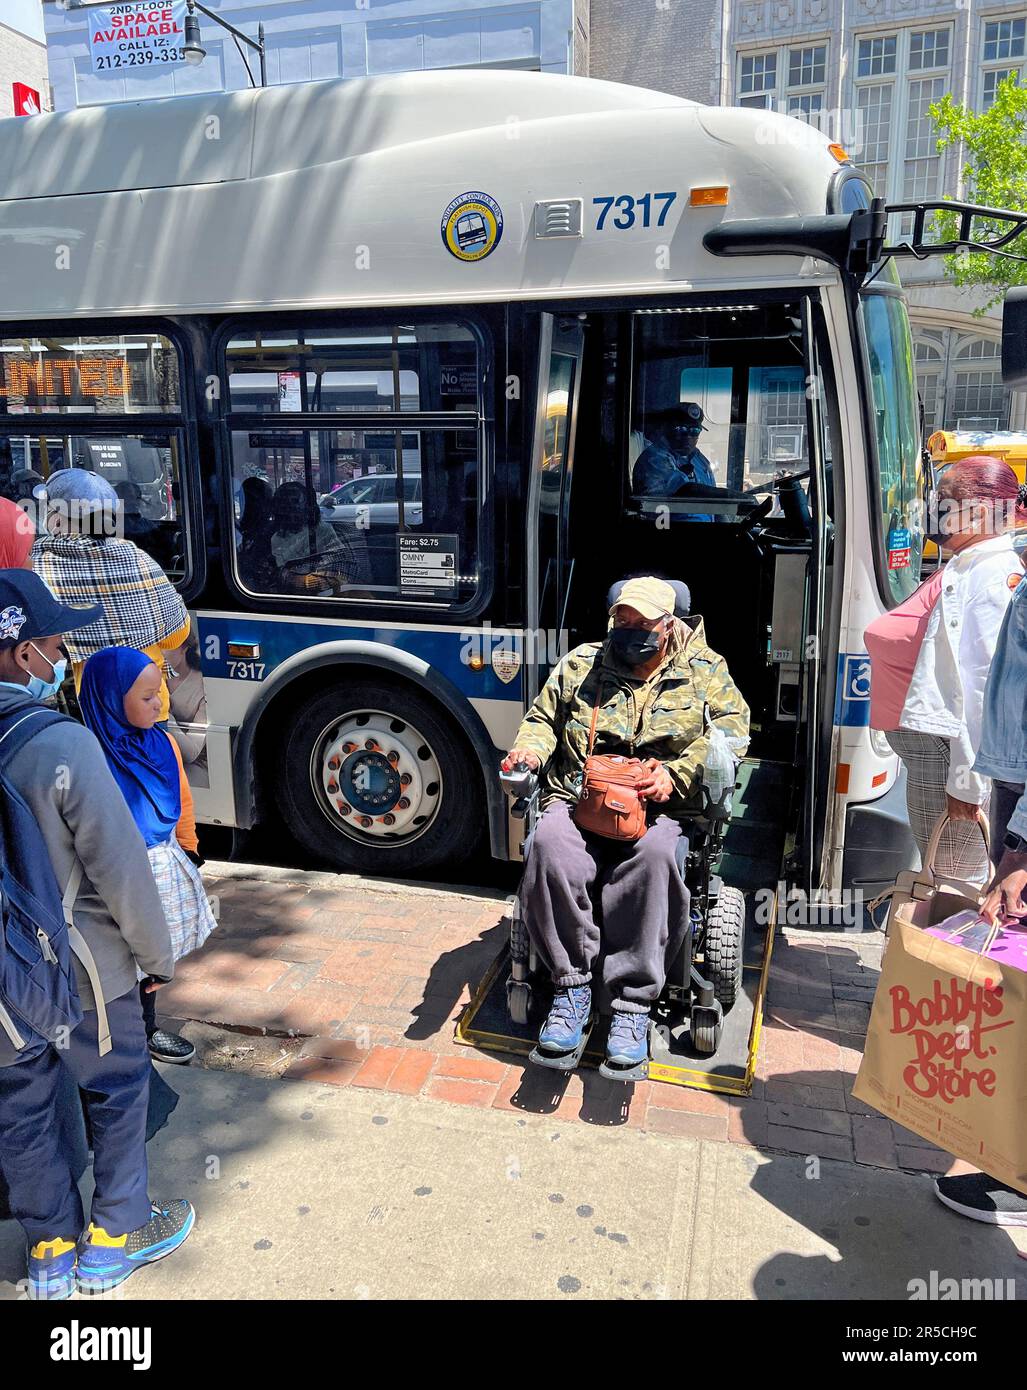 NYC buses are equipped to accommodate disabled people in wheelchairs with retractible ramps to get on and off the bus. Stock Photo